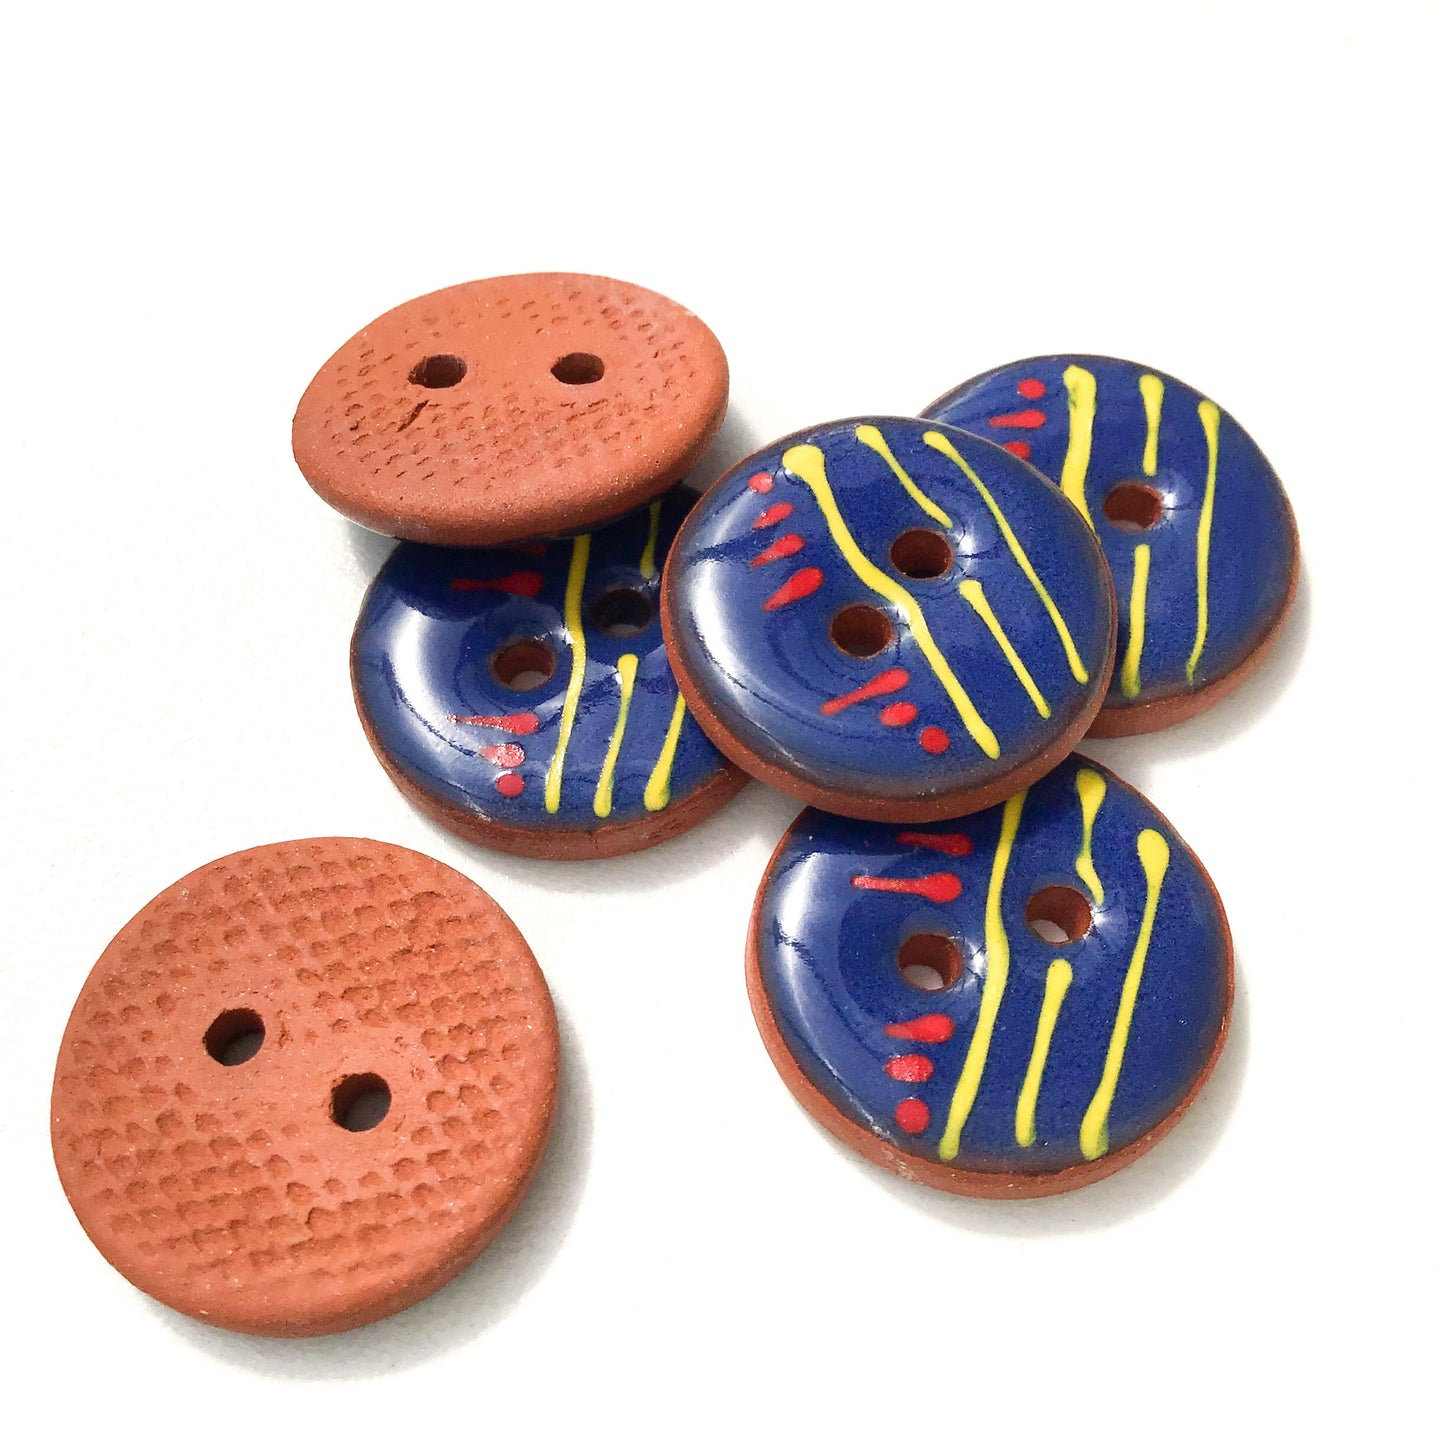 Deep Blue 'Line & Dash' Ceramic Buttons on Red Clay - Round Ceramic Buttons - 3/4" - 6 Pack